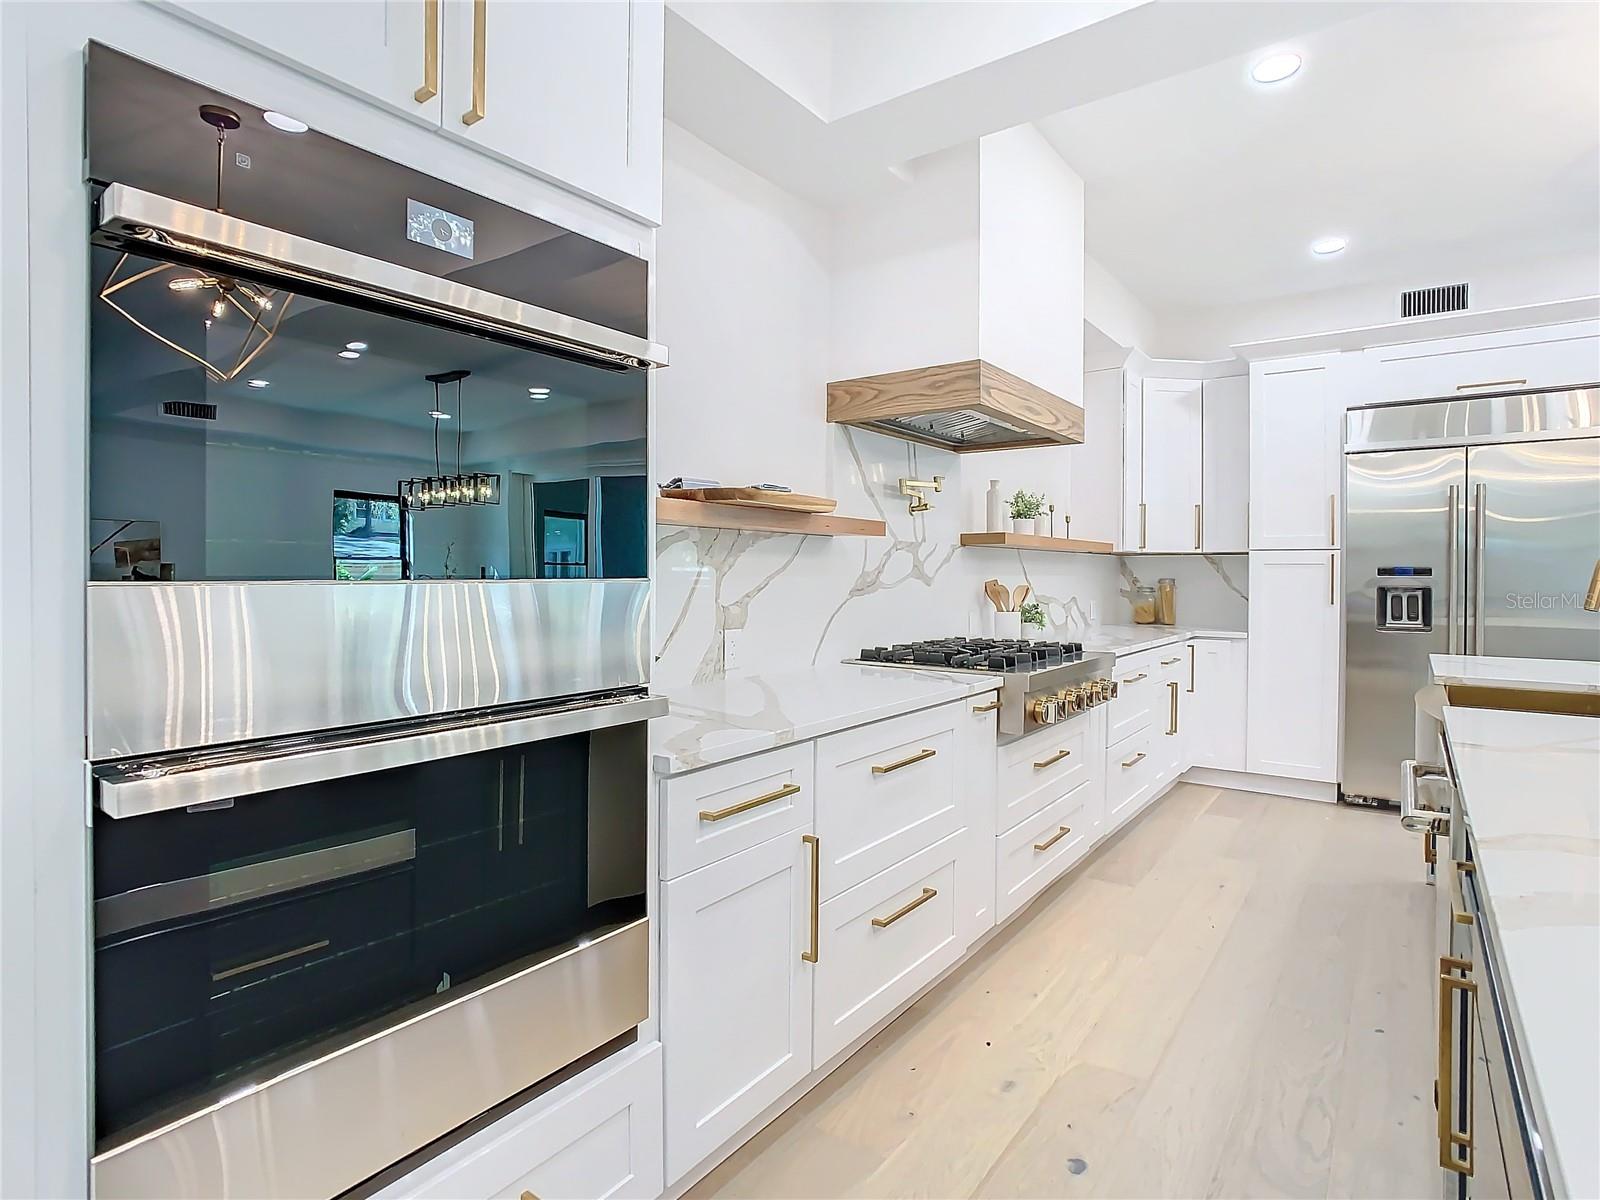 Gourmet Kitchen with Two-Tone Cabinets, Jenn-Aire Double Ovens, Below Island Microwave, Two-Tone Soft Close Cabinets with luxury hardware, lighting, and Retracting USB Charging Stations set inside quartz counters